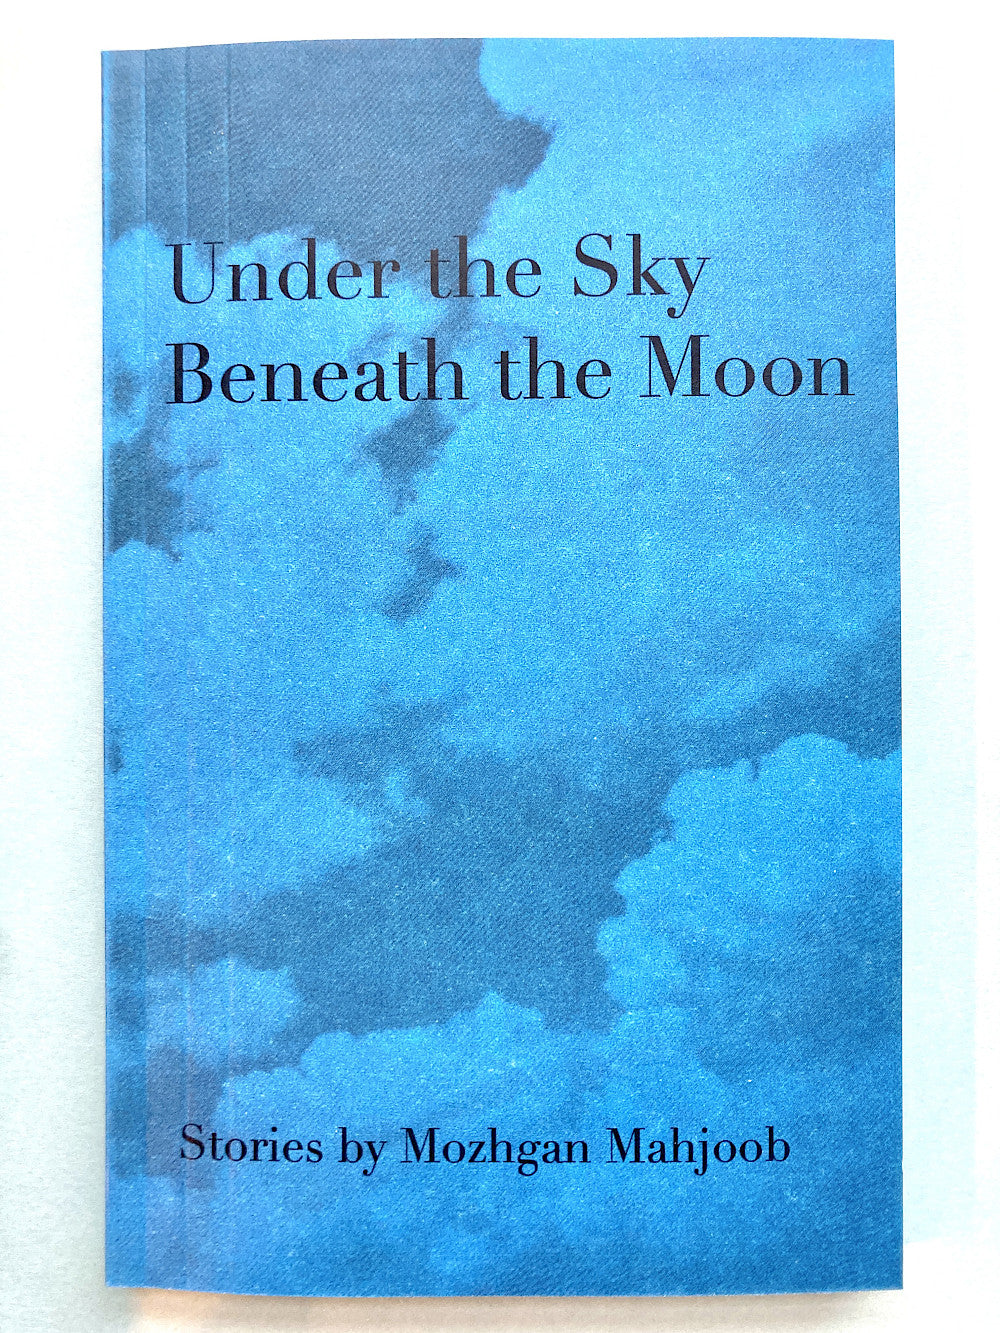 Under the Sky Beneath the Moon (Stories) by Mozhgan Mahjoob